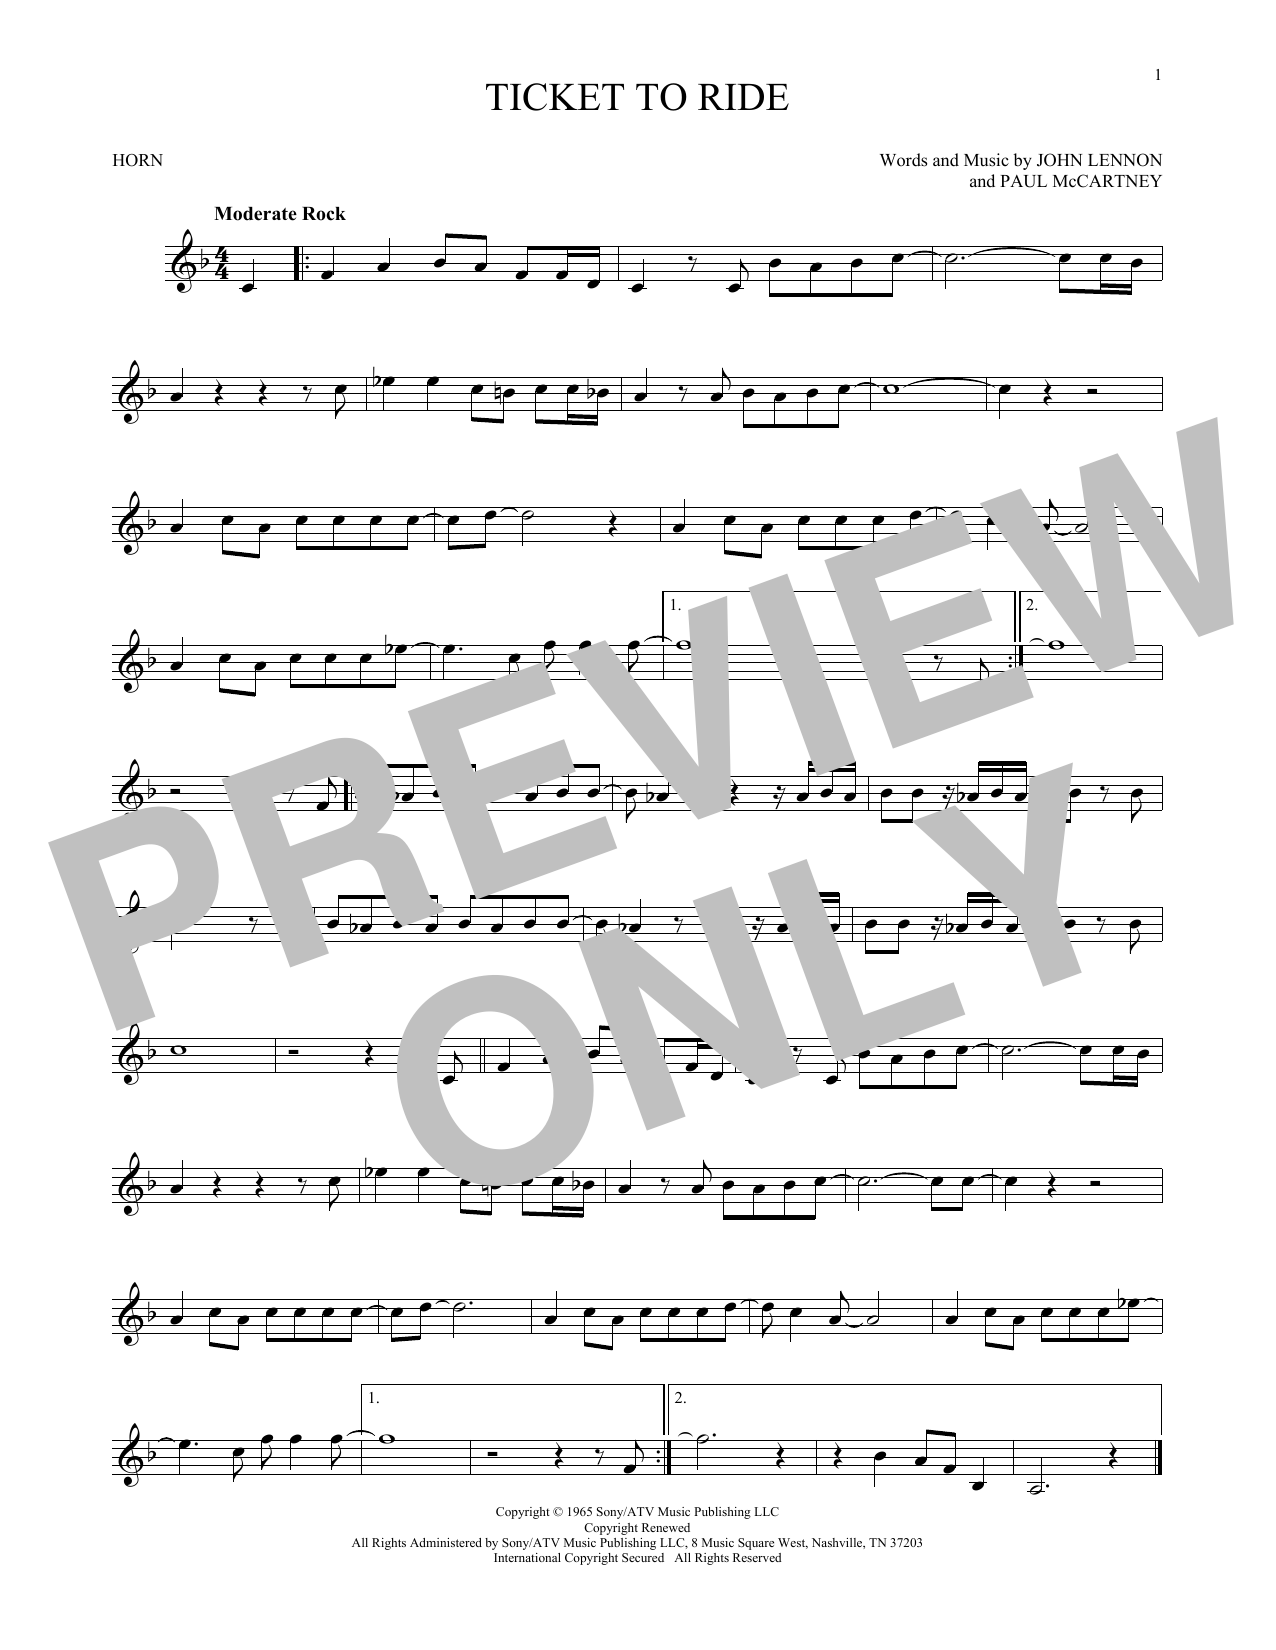 Download The Beatles Ticket To Ride Sheet Music